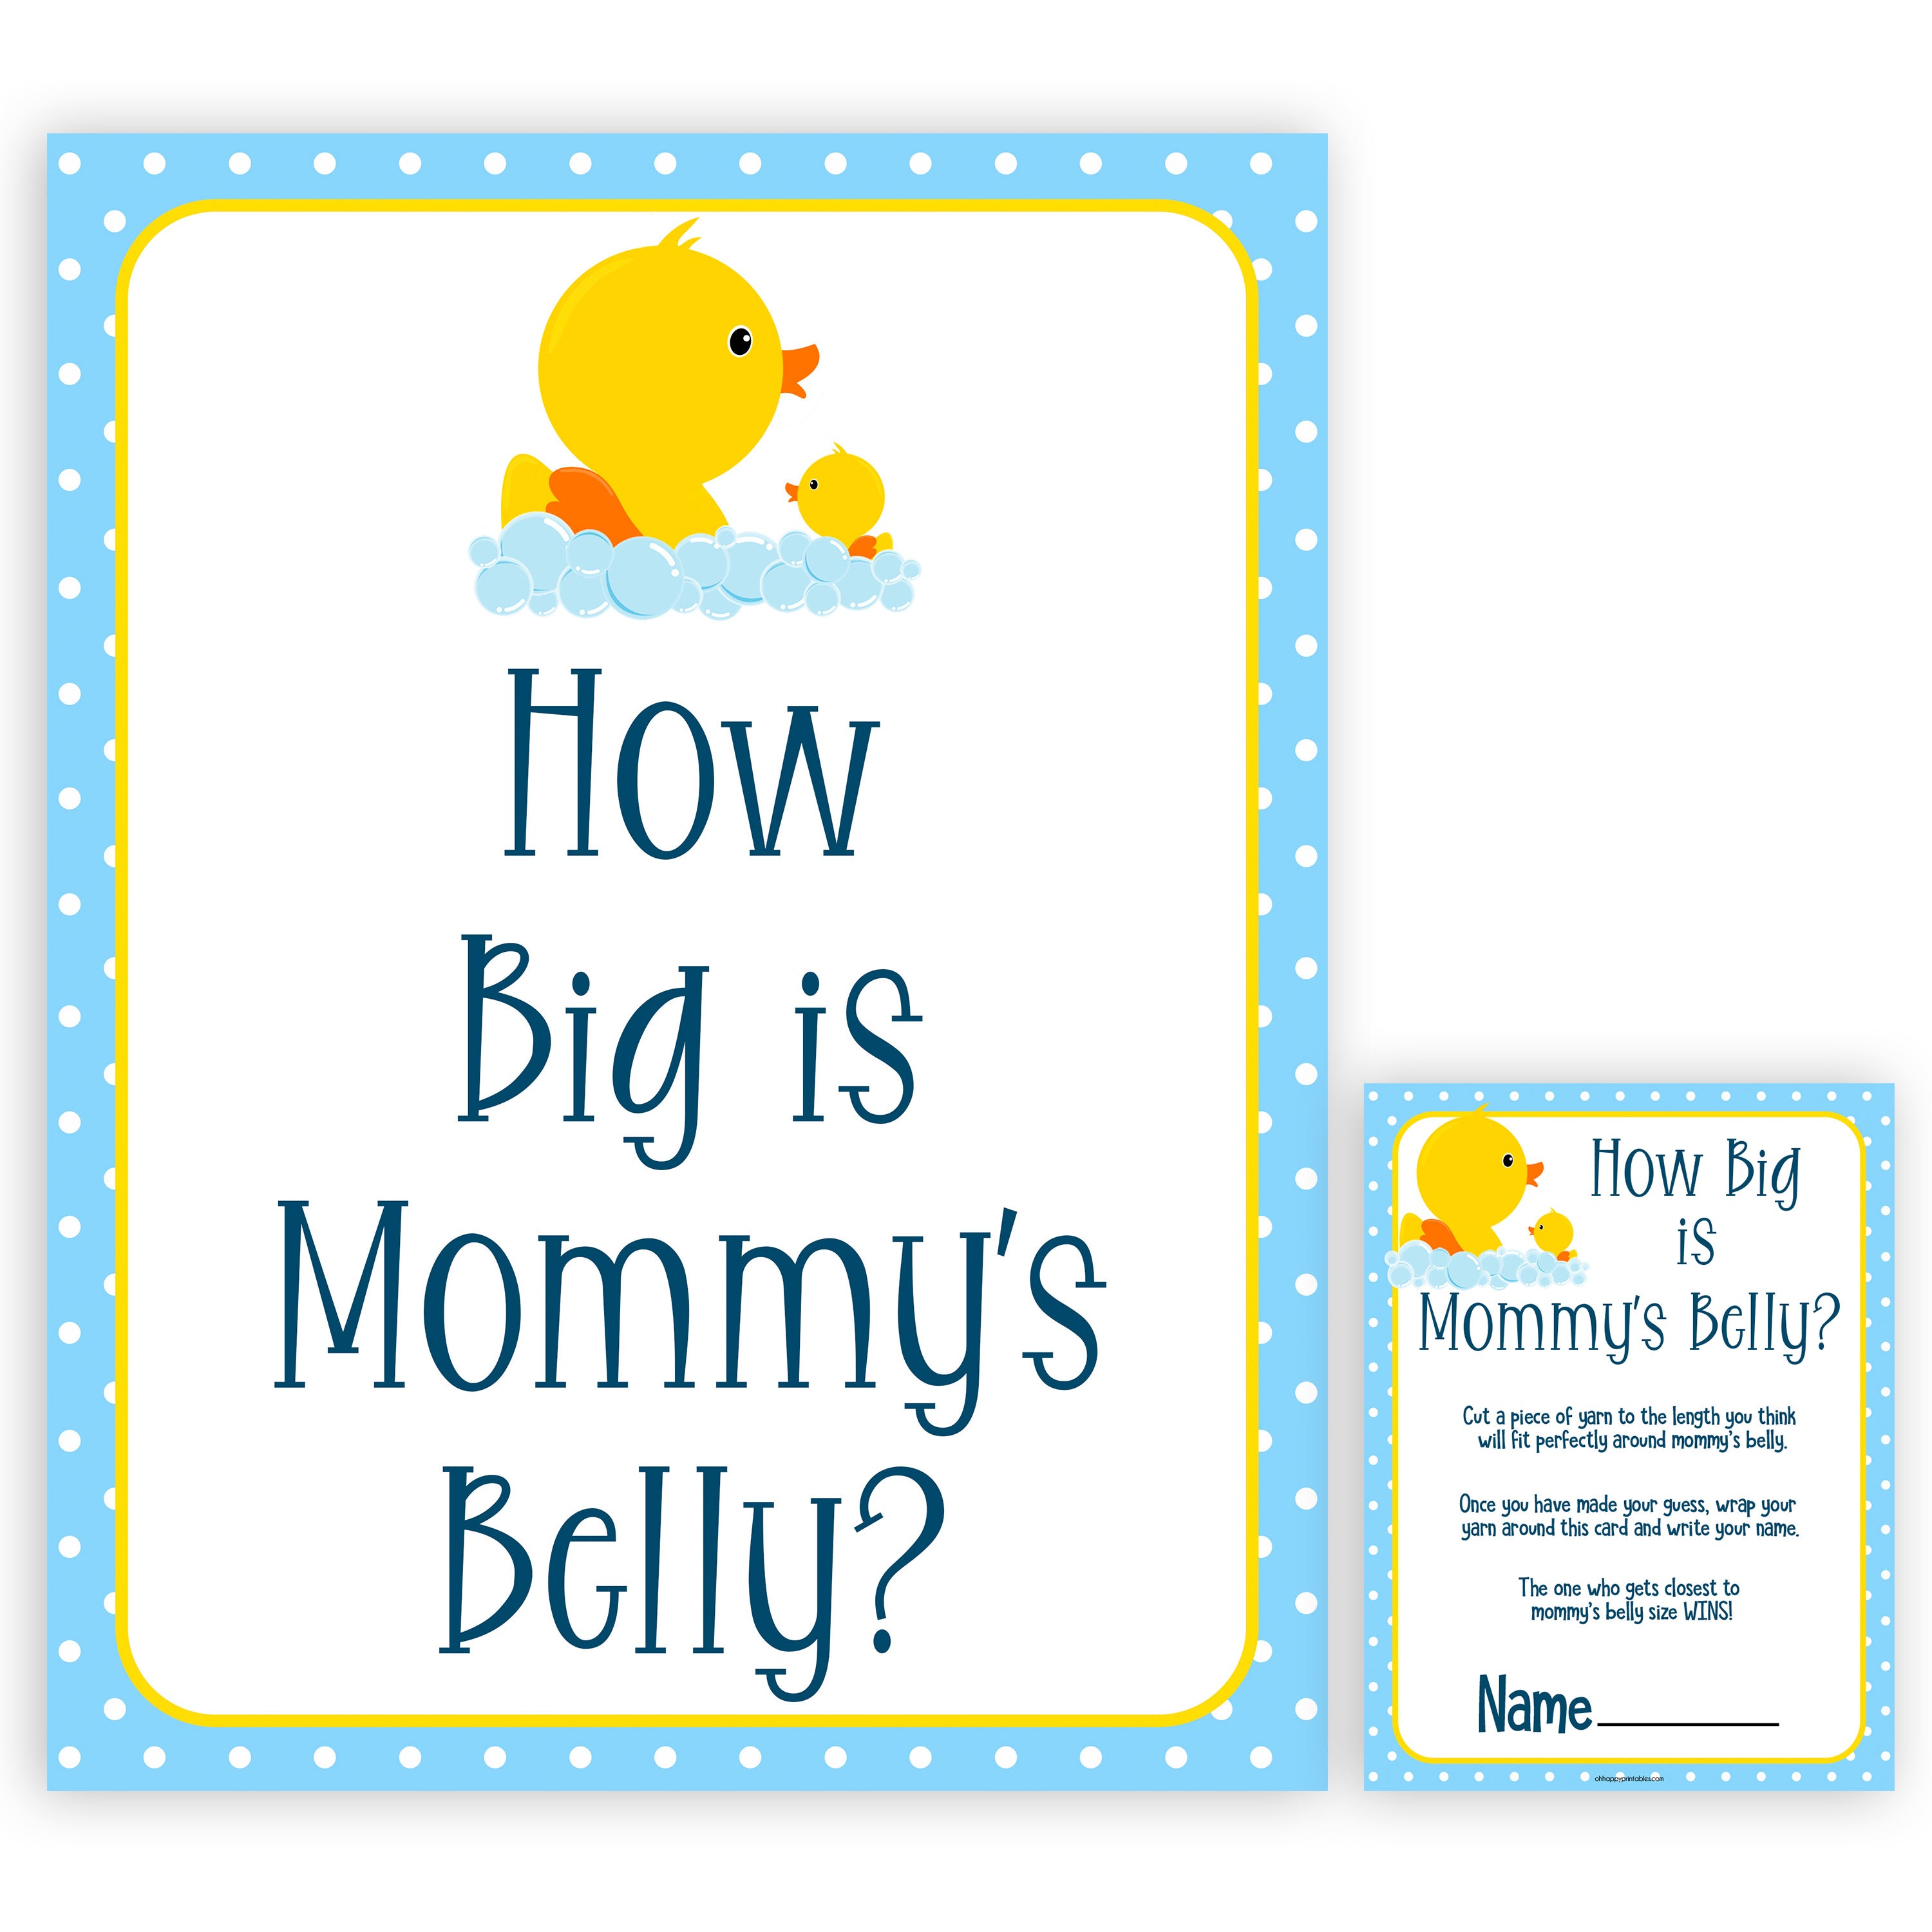 rubber ducky baby games, how big is mommys belly baby game, printable baby games, baby shower games, rubber ducky baby theme, fun baby games, popular baby games